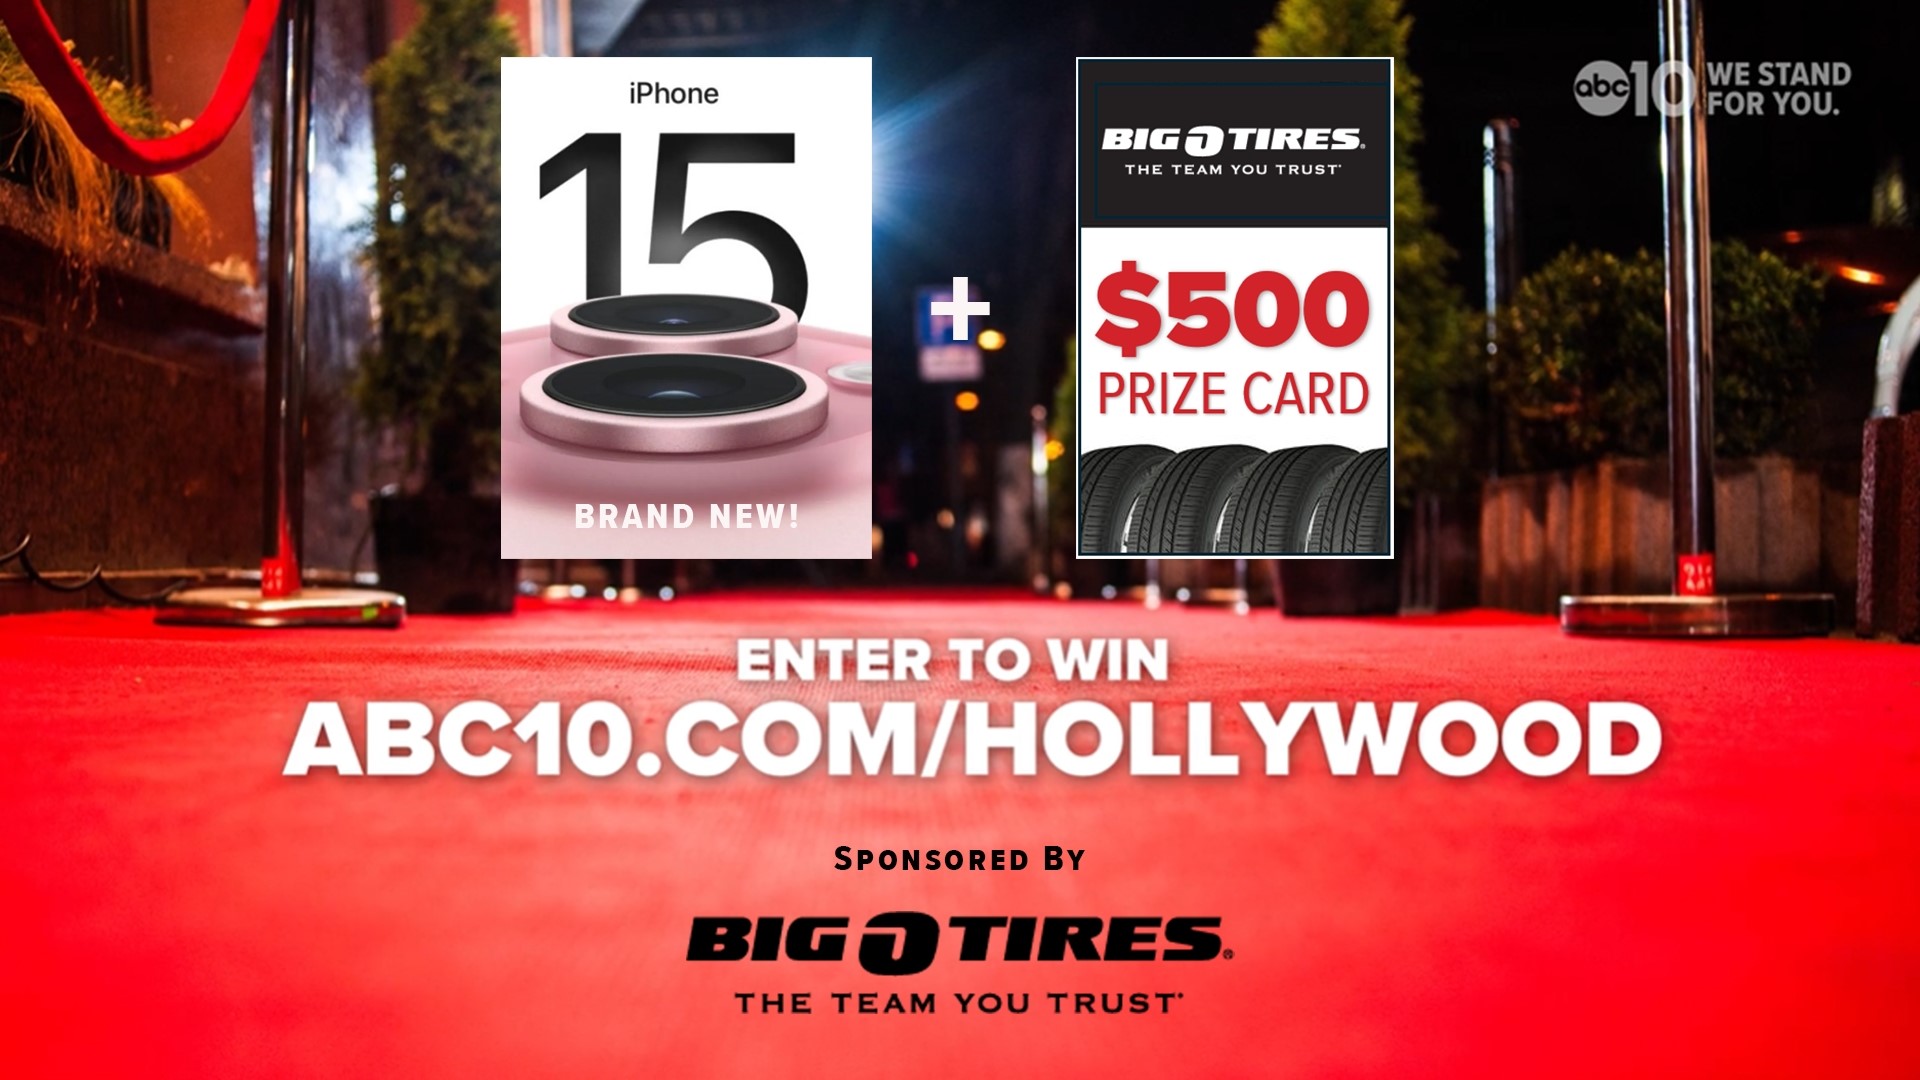 Enter to win today and don't miss Hollywood's Biggest Night on ABC10 Sunday, March 10th at 4:30pm.